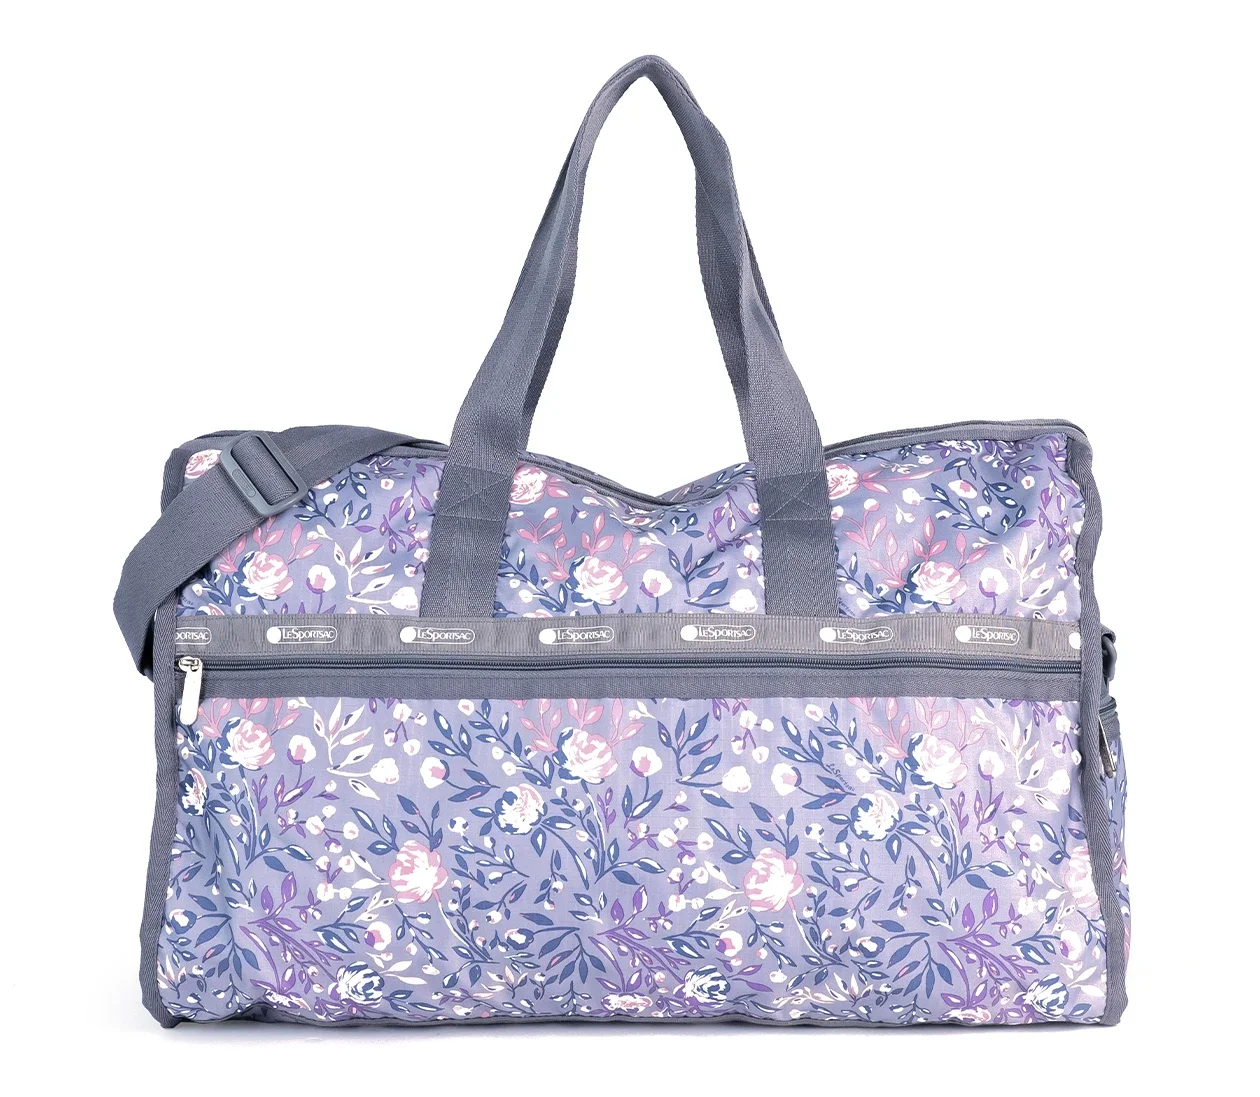 LeSportsac - Official Page: A New Print is In! Dancing Roses 